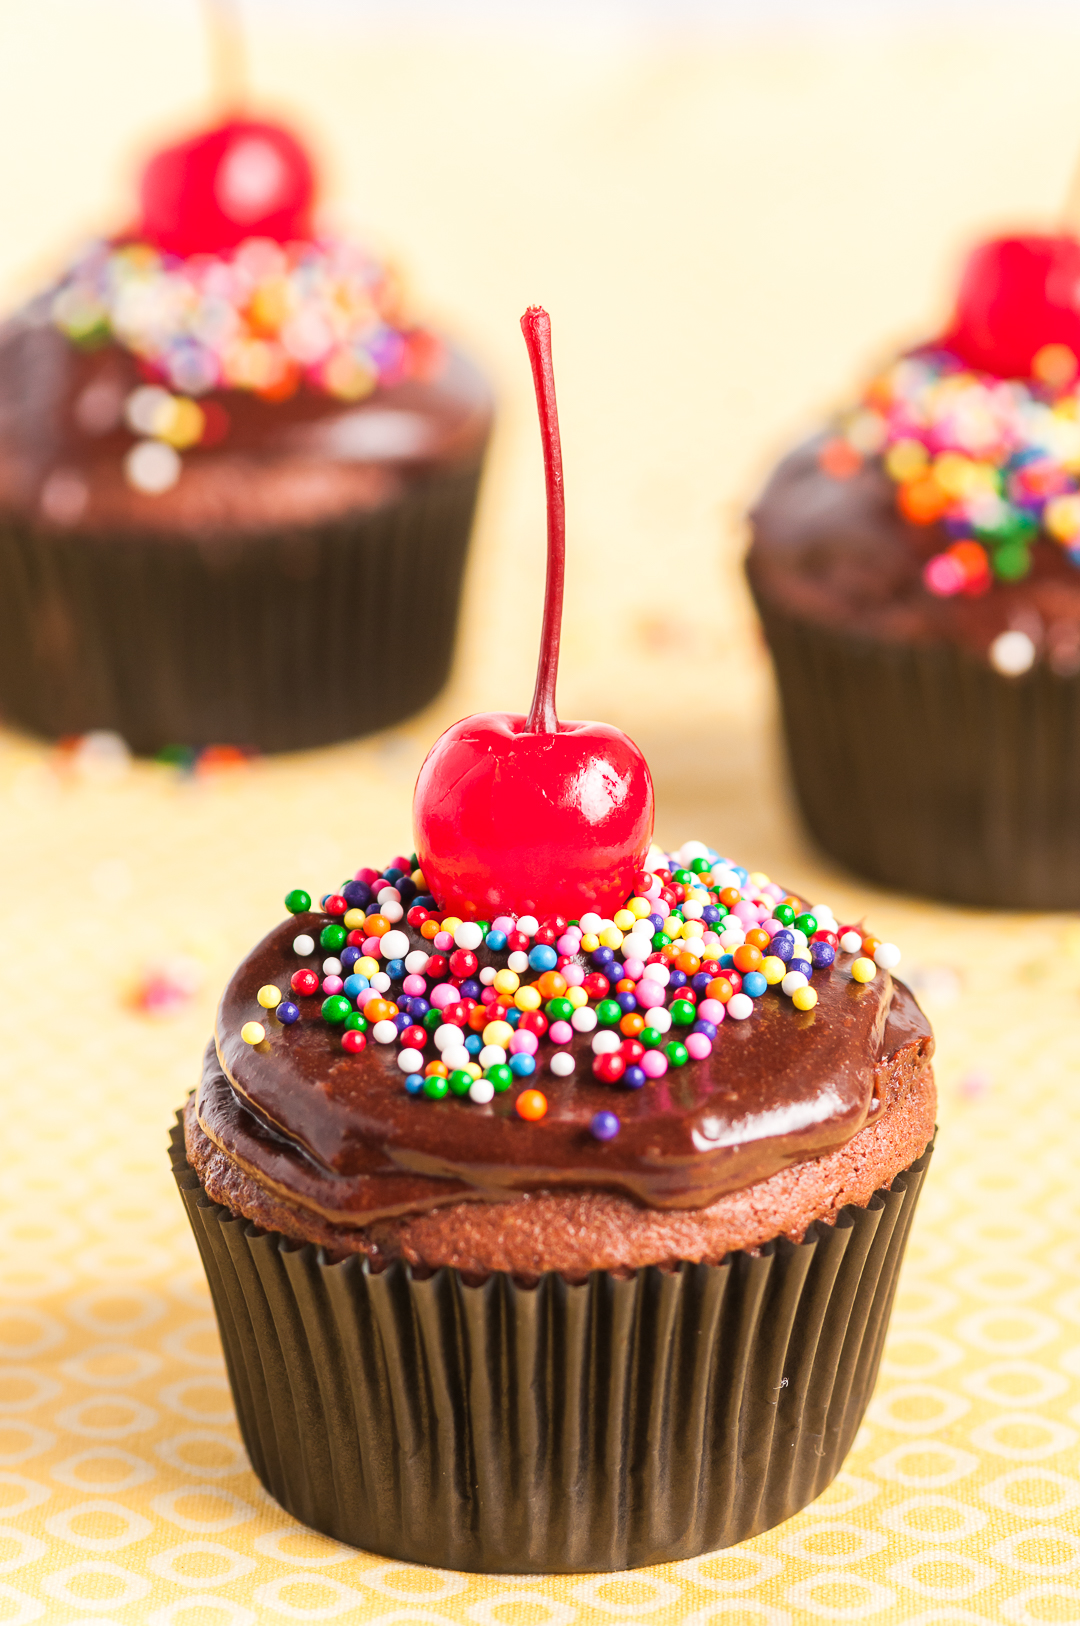 pretty chocolate cupcakes with chocolate frosting, sprinkles and cherries